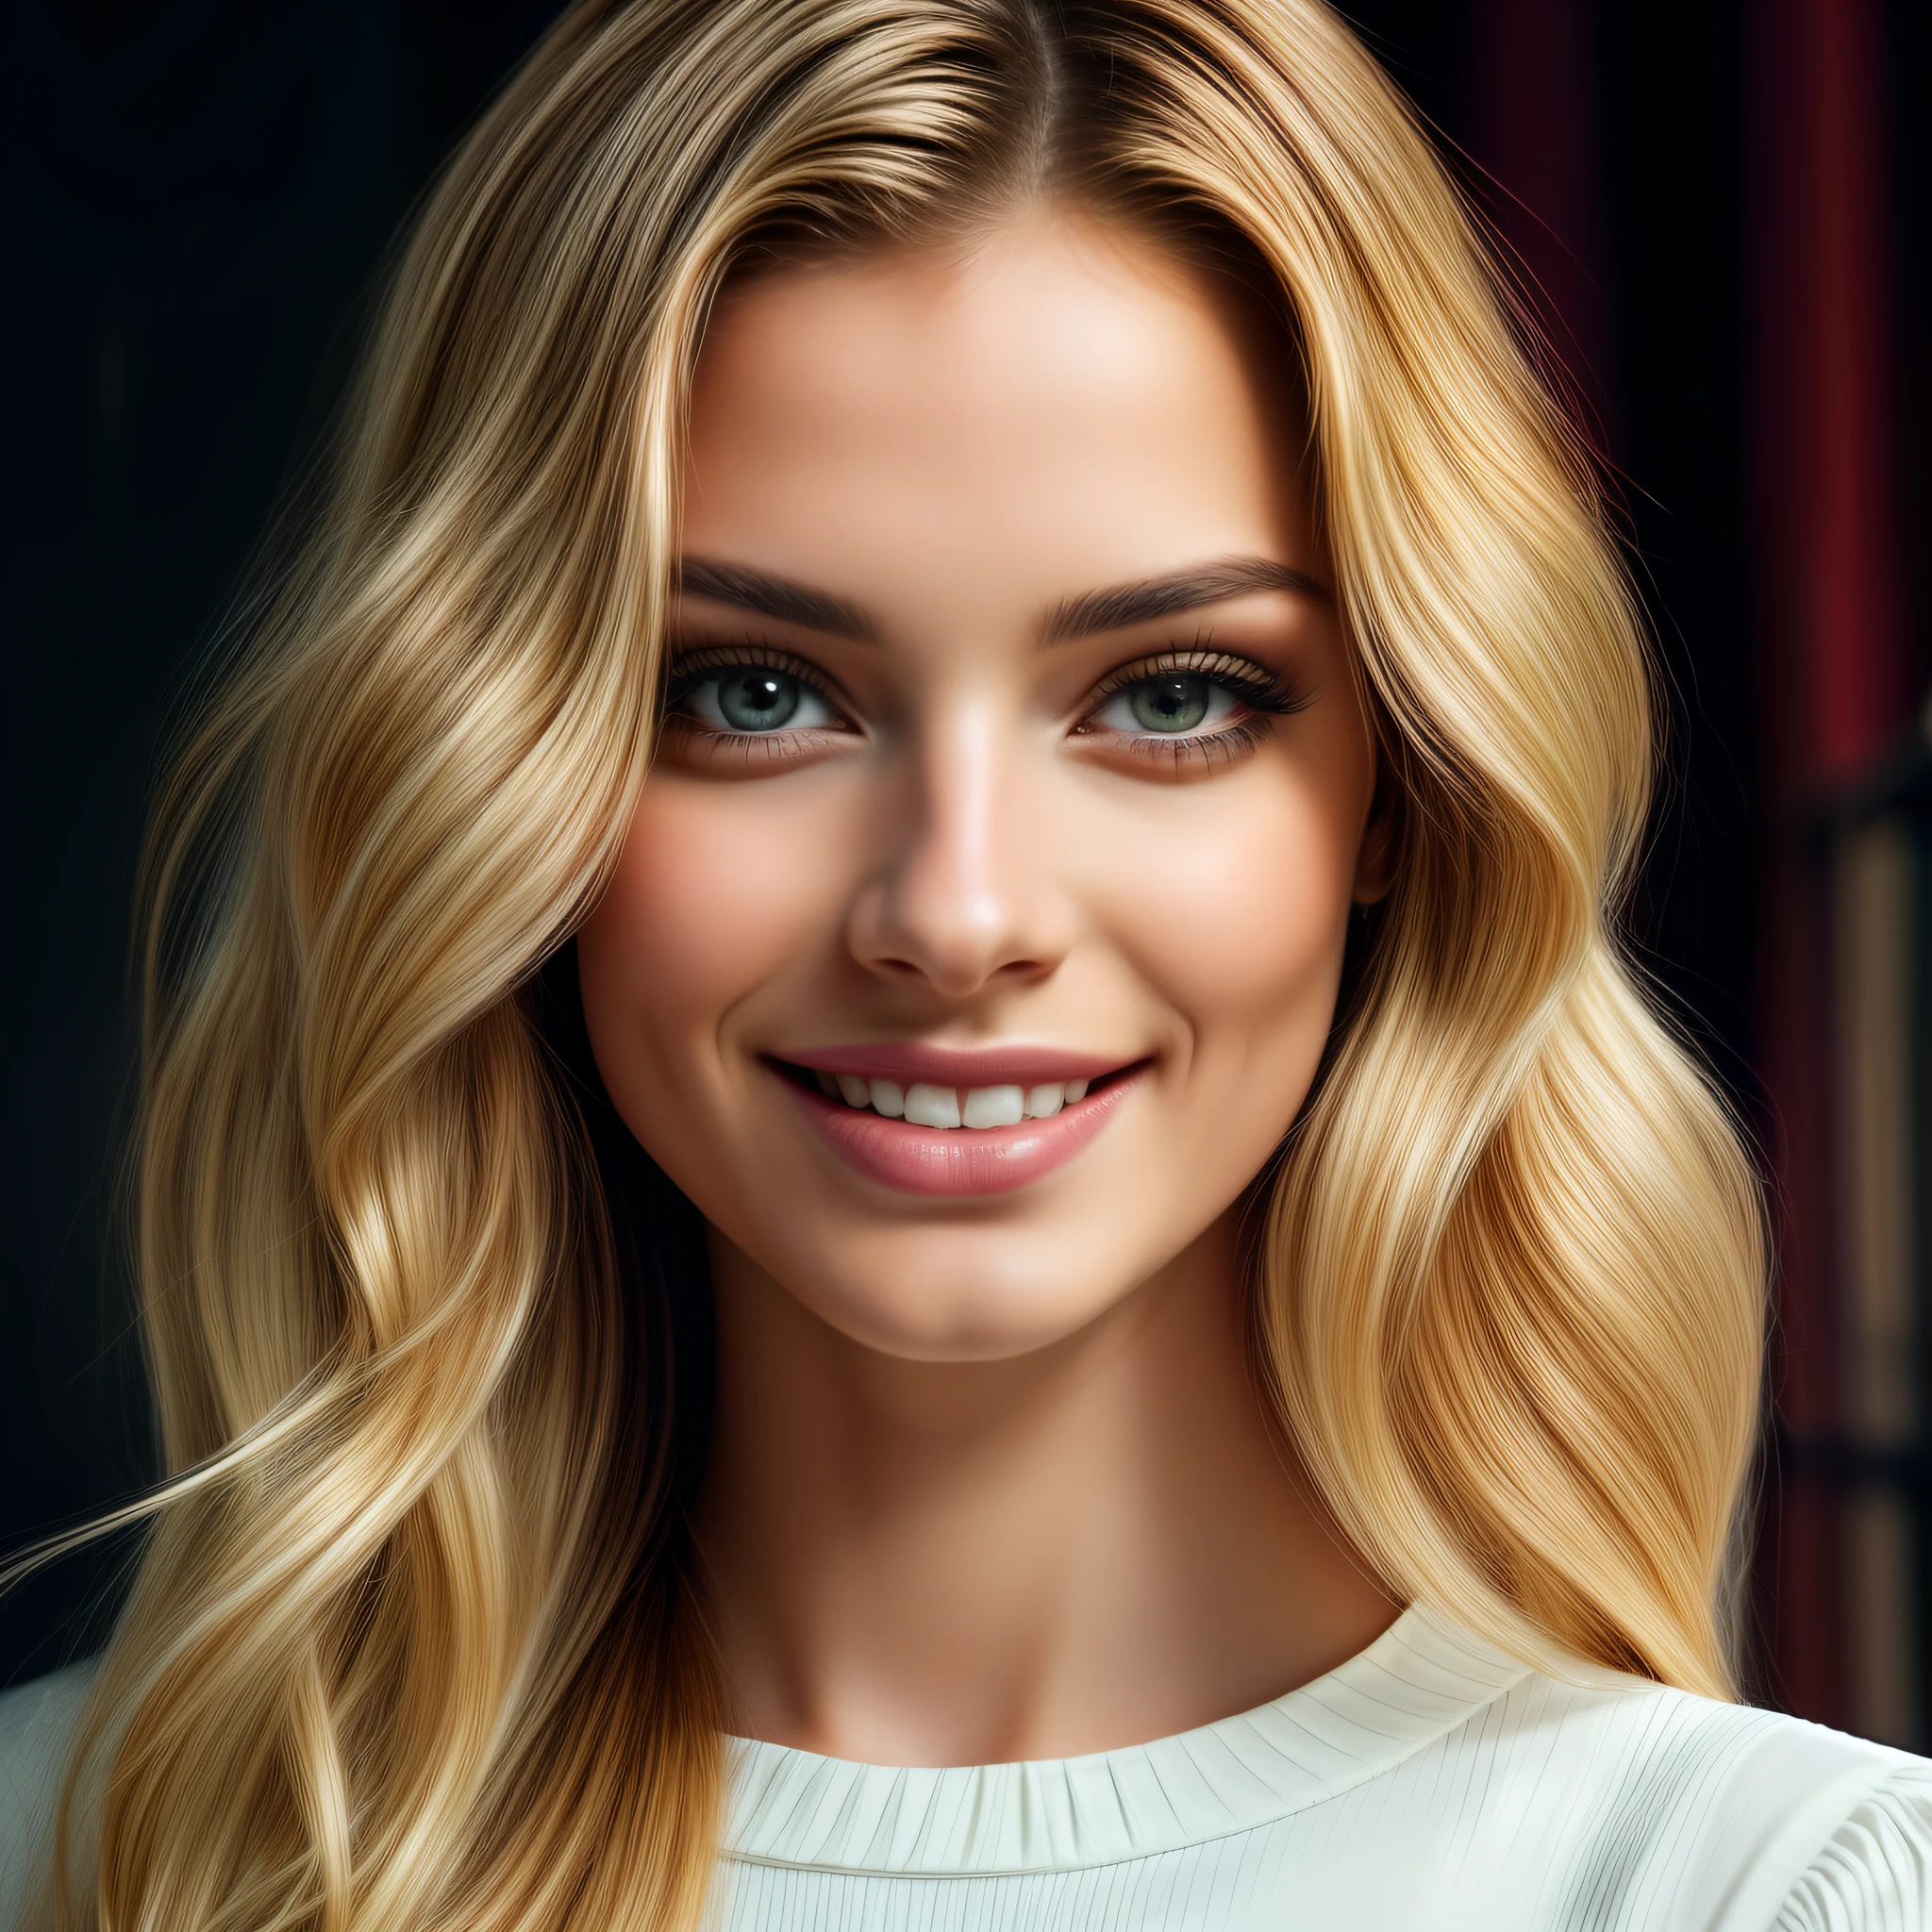 https://s.mj.run/Jt_VmkFeeEI beautiful woman in frontal view longblond Hair with Wavy Hair photo, photo, high details in white background larrge room , 35mm smile woman, (masterpiece), (best quality), (high quality), (highres), best quality, high resolution fix, bright amazing lighting, detail enhancement, (Masterpiece), (Best Quality), (High Quality), (Highres), best quality, high resolution fix, bright amazing lighting, detail enhancement , The resolution is 8k,with a cinematic aspect ratio of of 32K stylize 1000 T